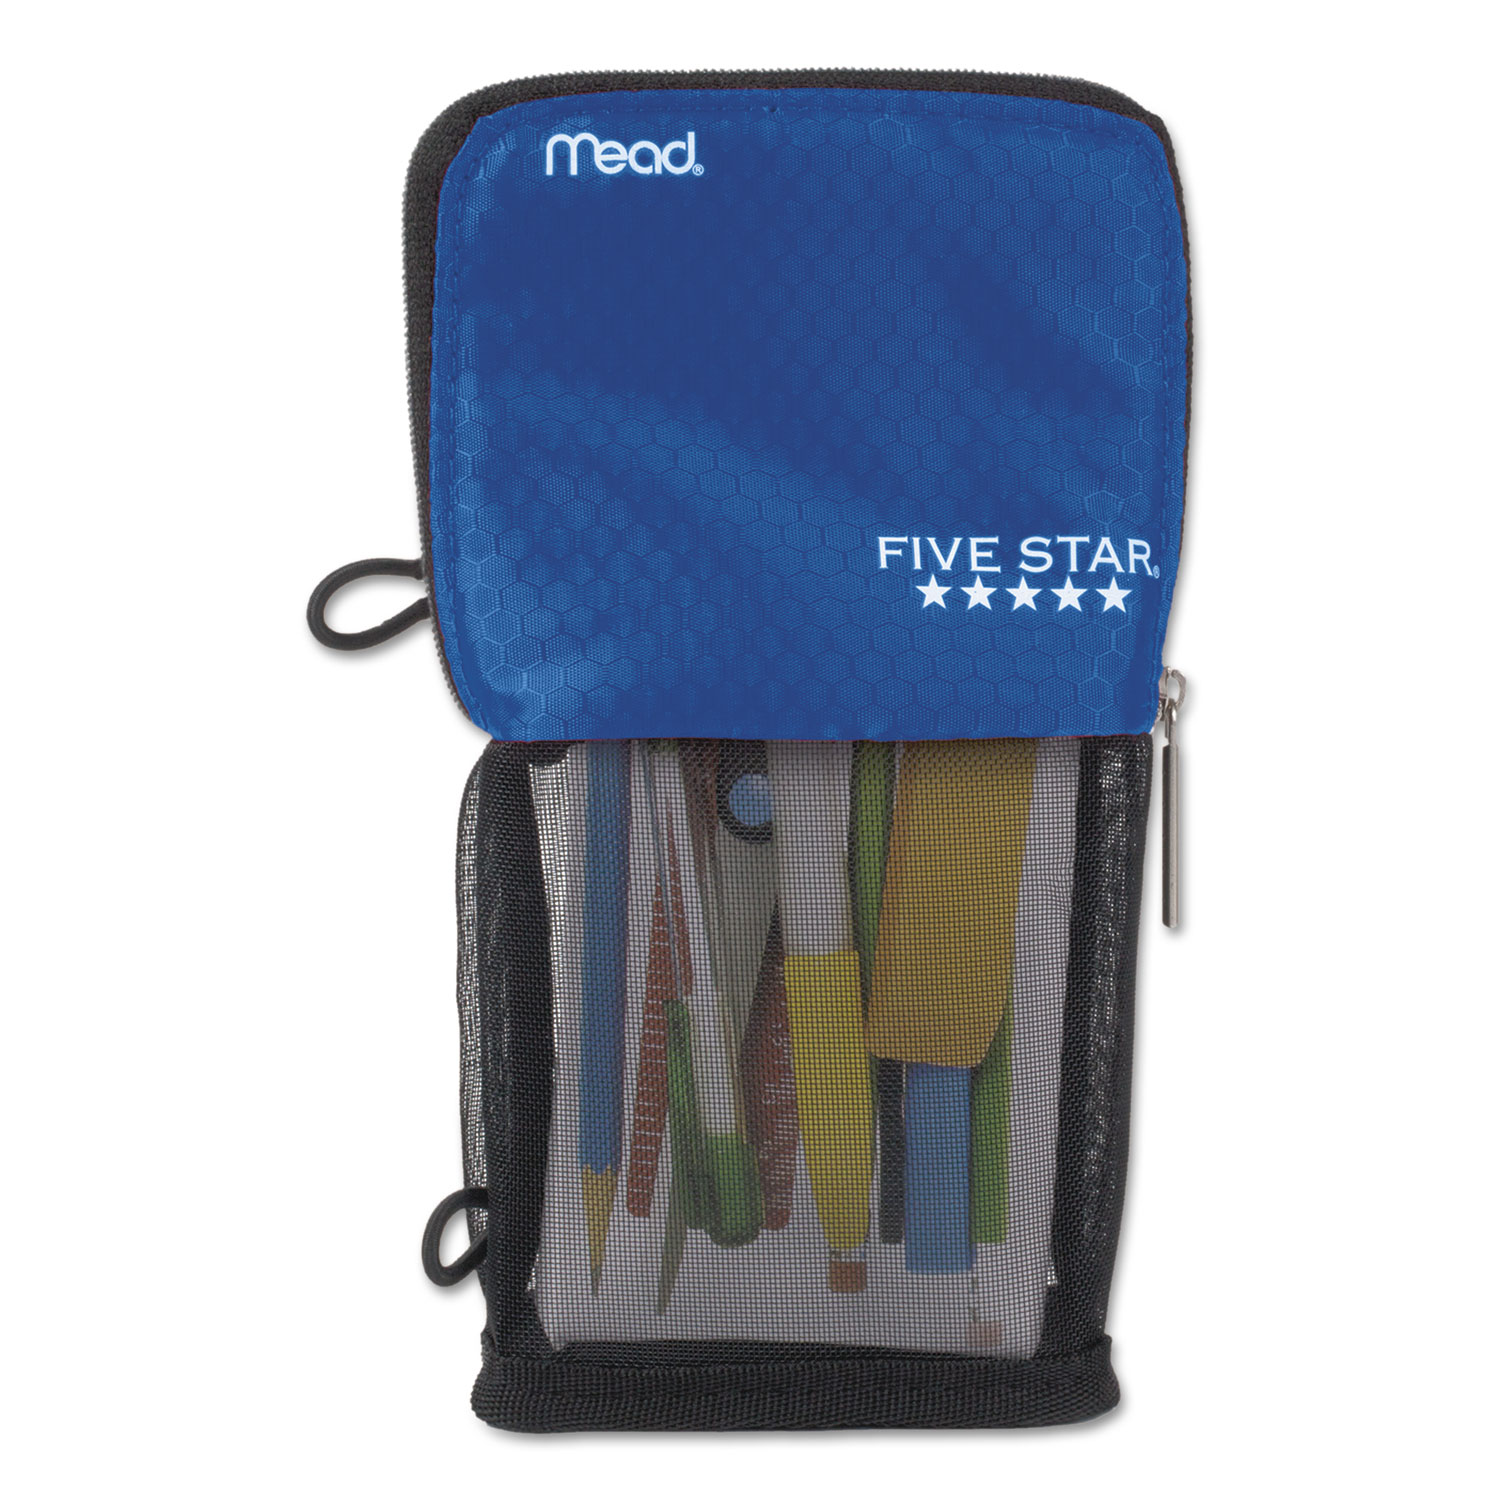 Stand 'N Store Pencil Pouch, 4 1/2 x 8, Cobalt